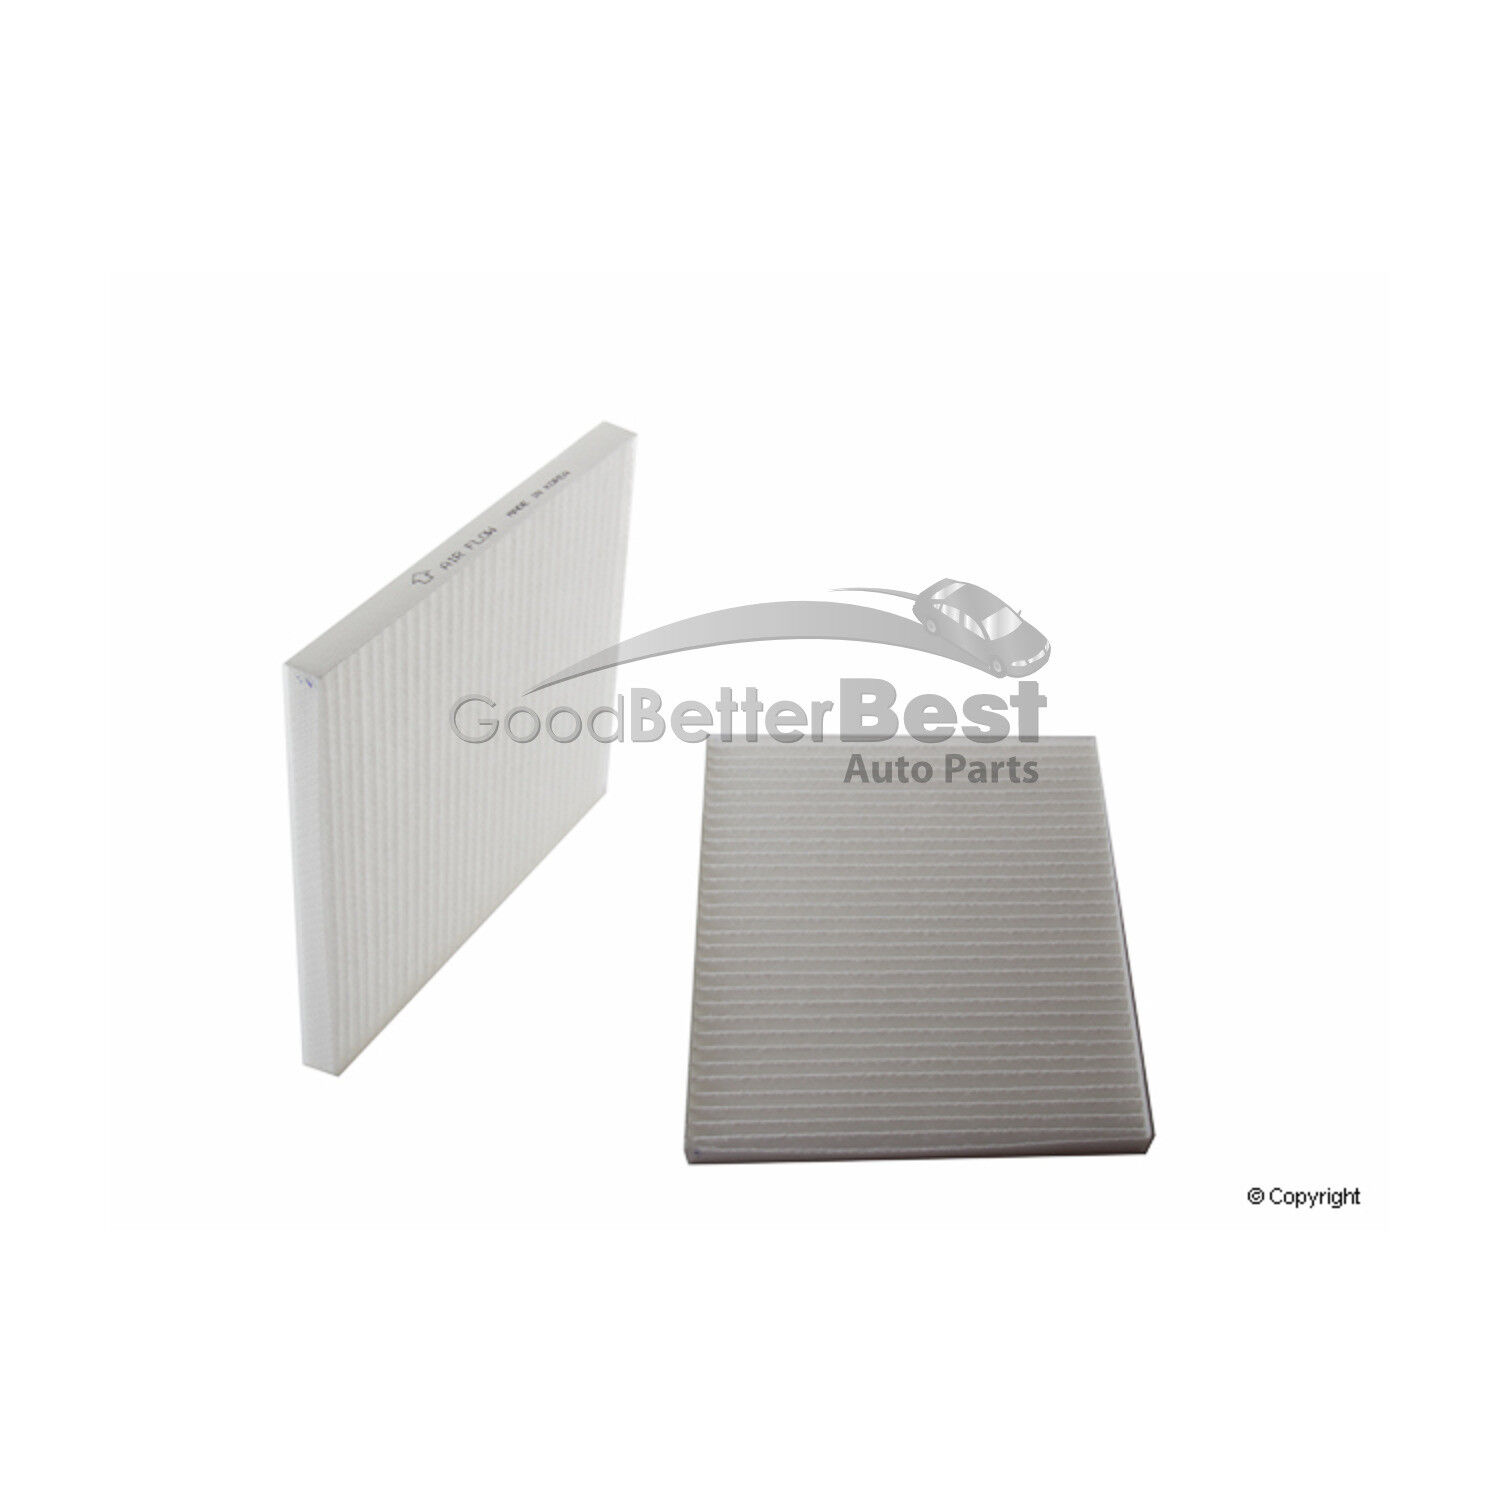 One New Parts-Mall Cabin Air Filter PMAP33 087902E200A for Hyundai